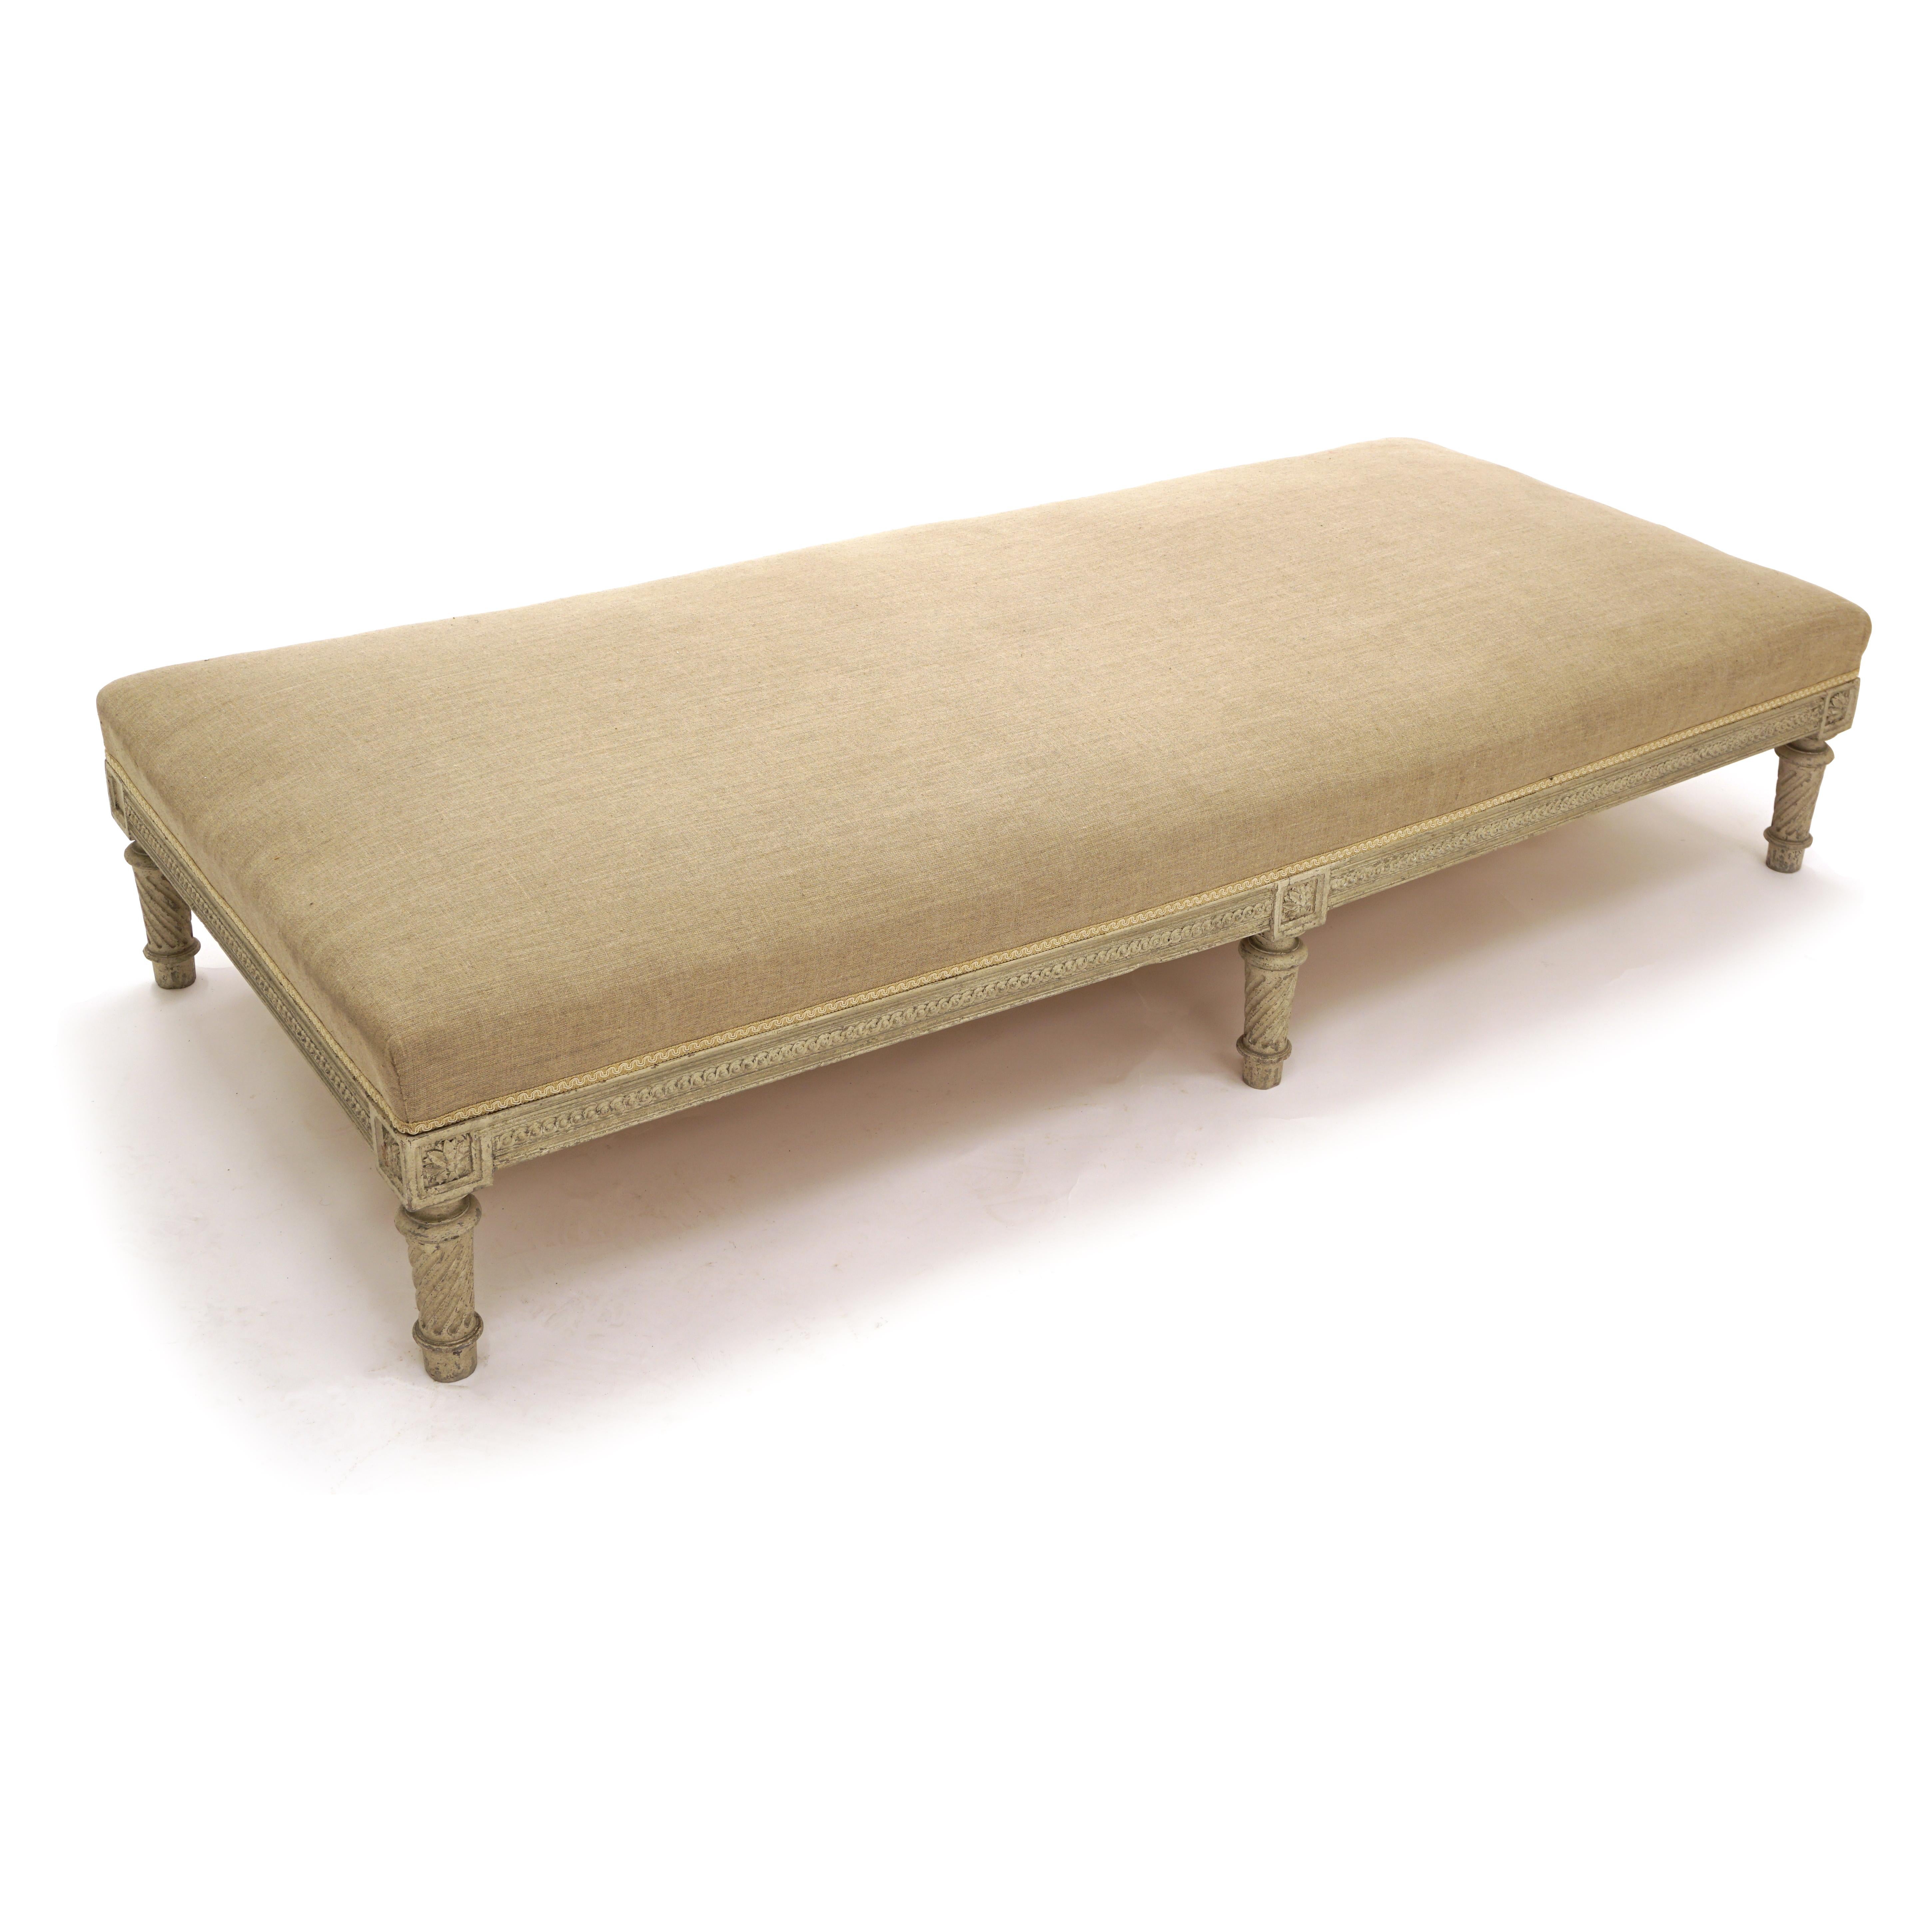 Swedish Gustavian Style Daybed in Grey/White Colors, Sweden, circa 1860-80 For Sale